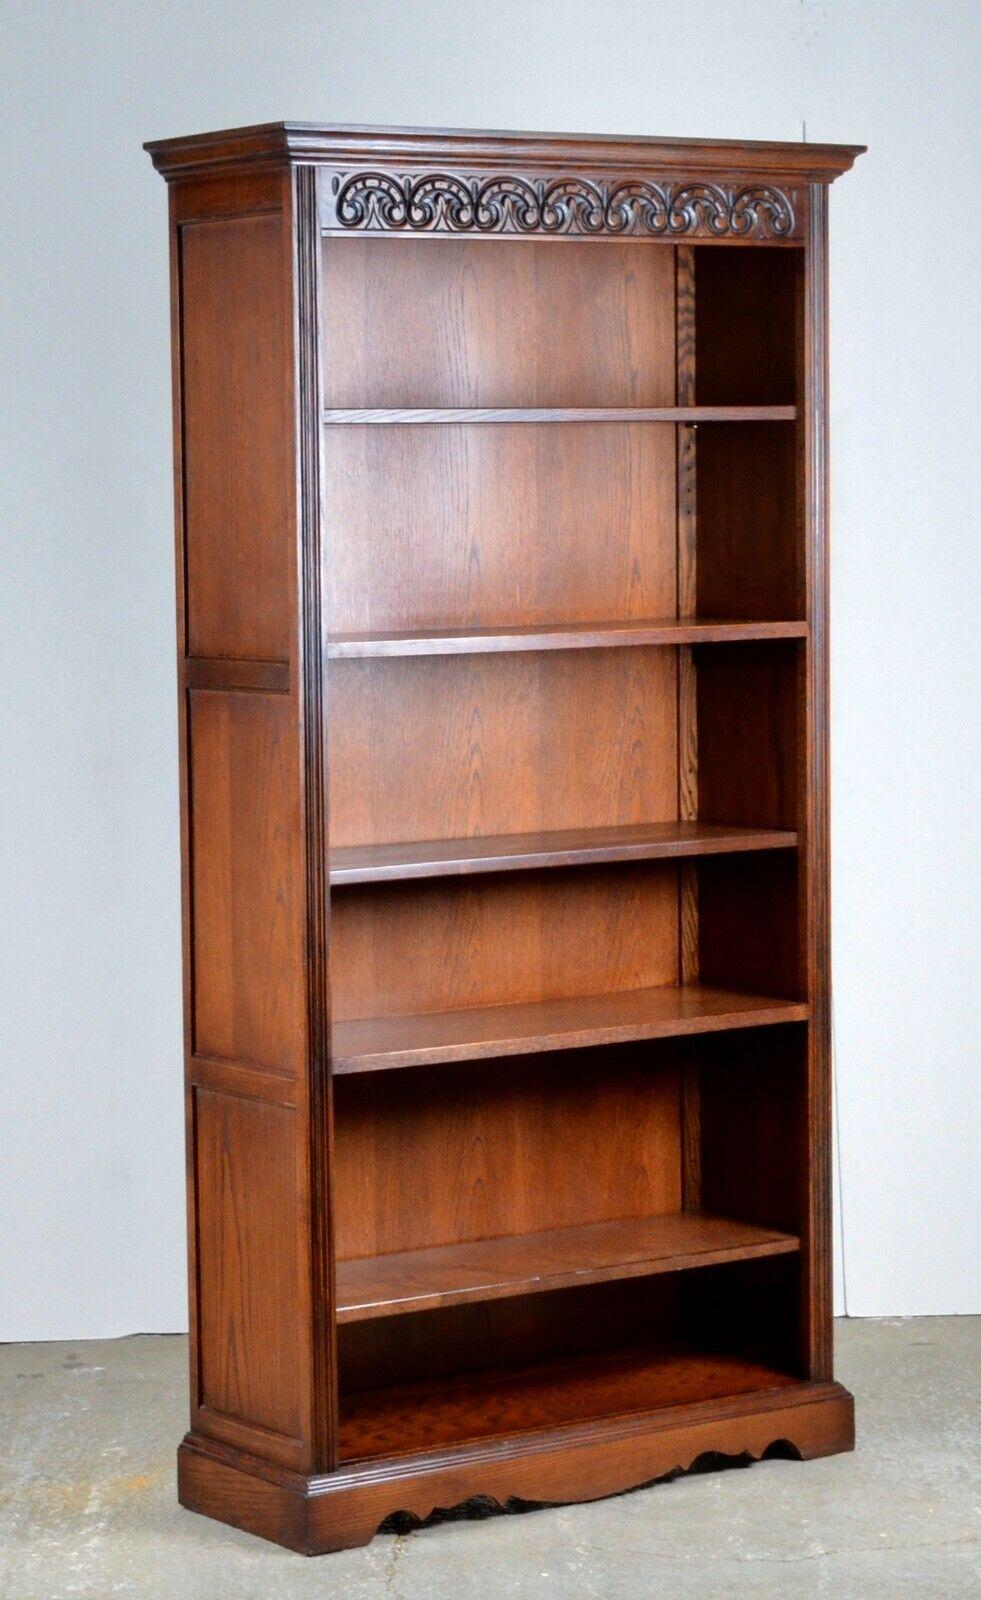 We are delighted to offer for sale this Wood Brothers Old Charm antique oak library bookcase. Made in England with oak timber it features open shelving with five shelves, three are adjustable so they can accommodate any height book you may have.